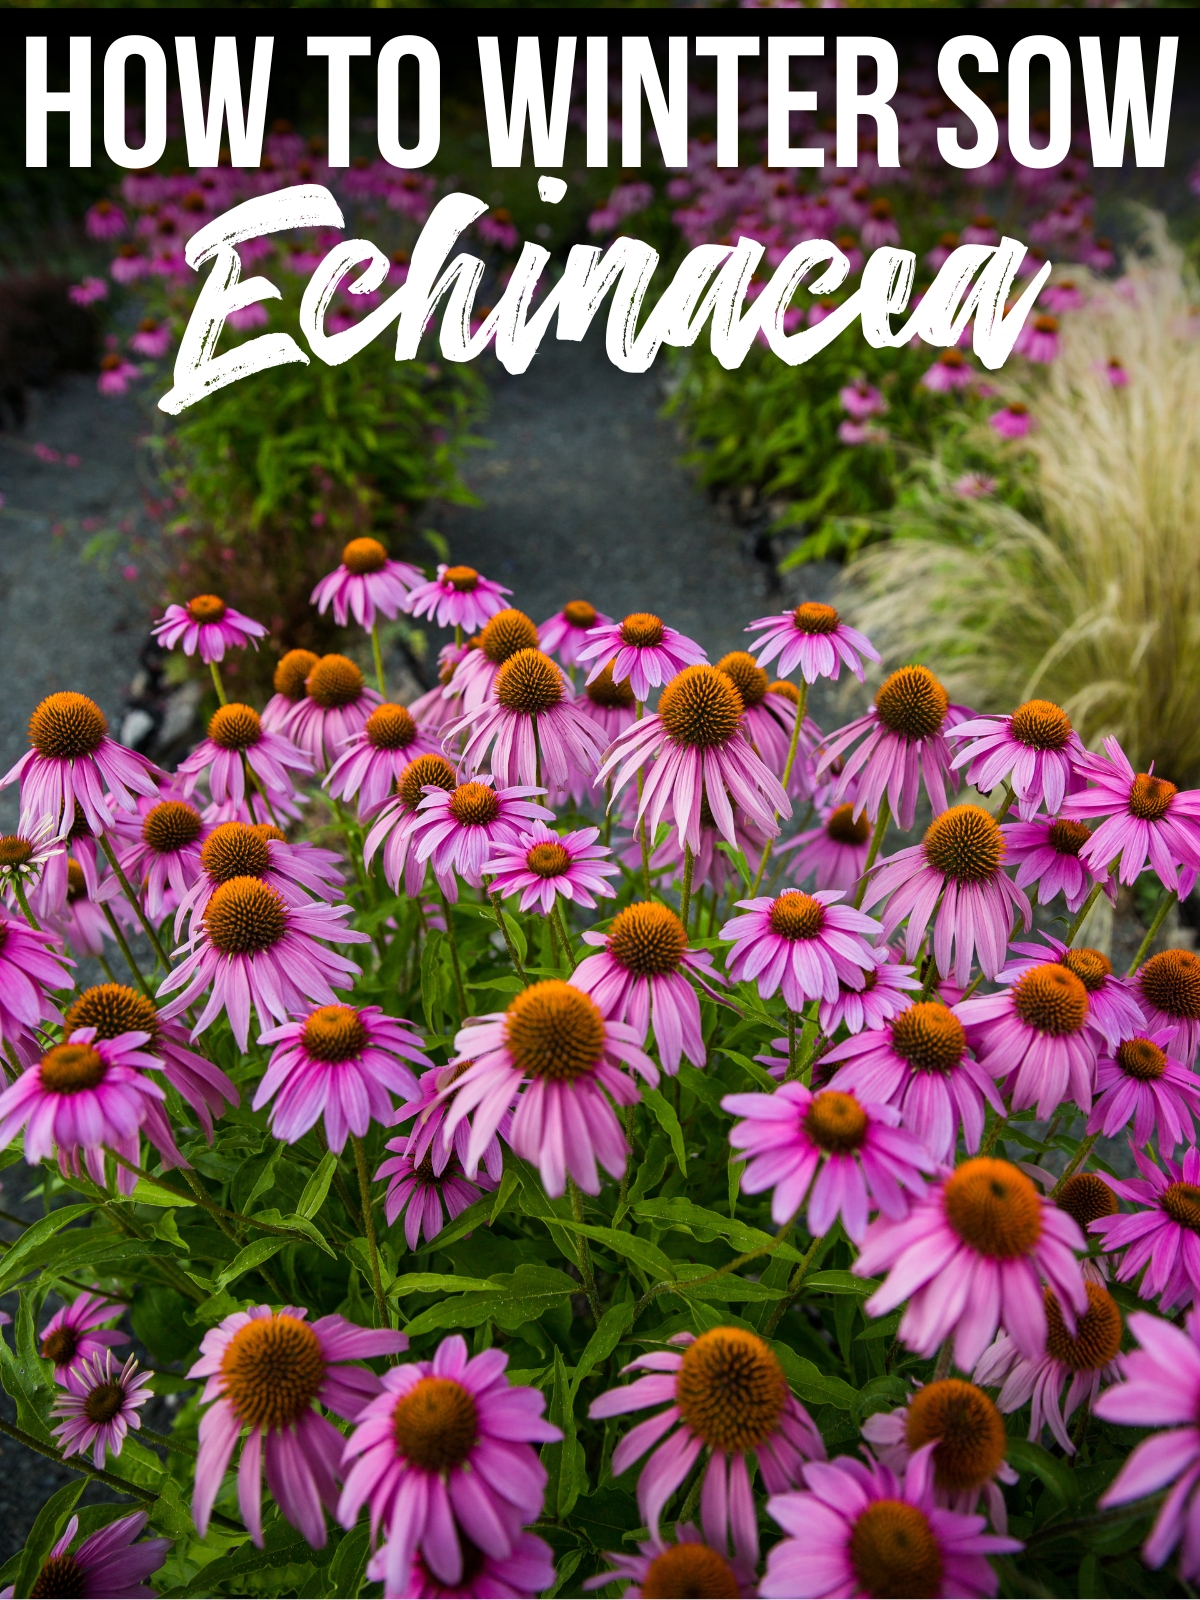 How to Winter Sow Echinacea